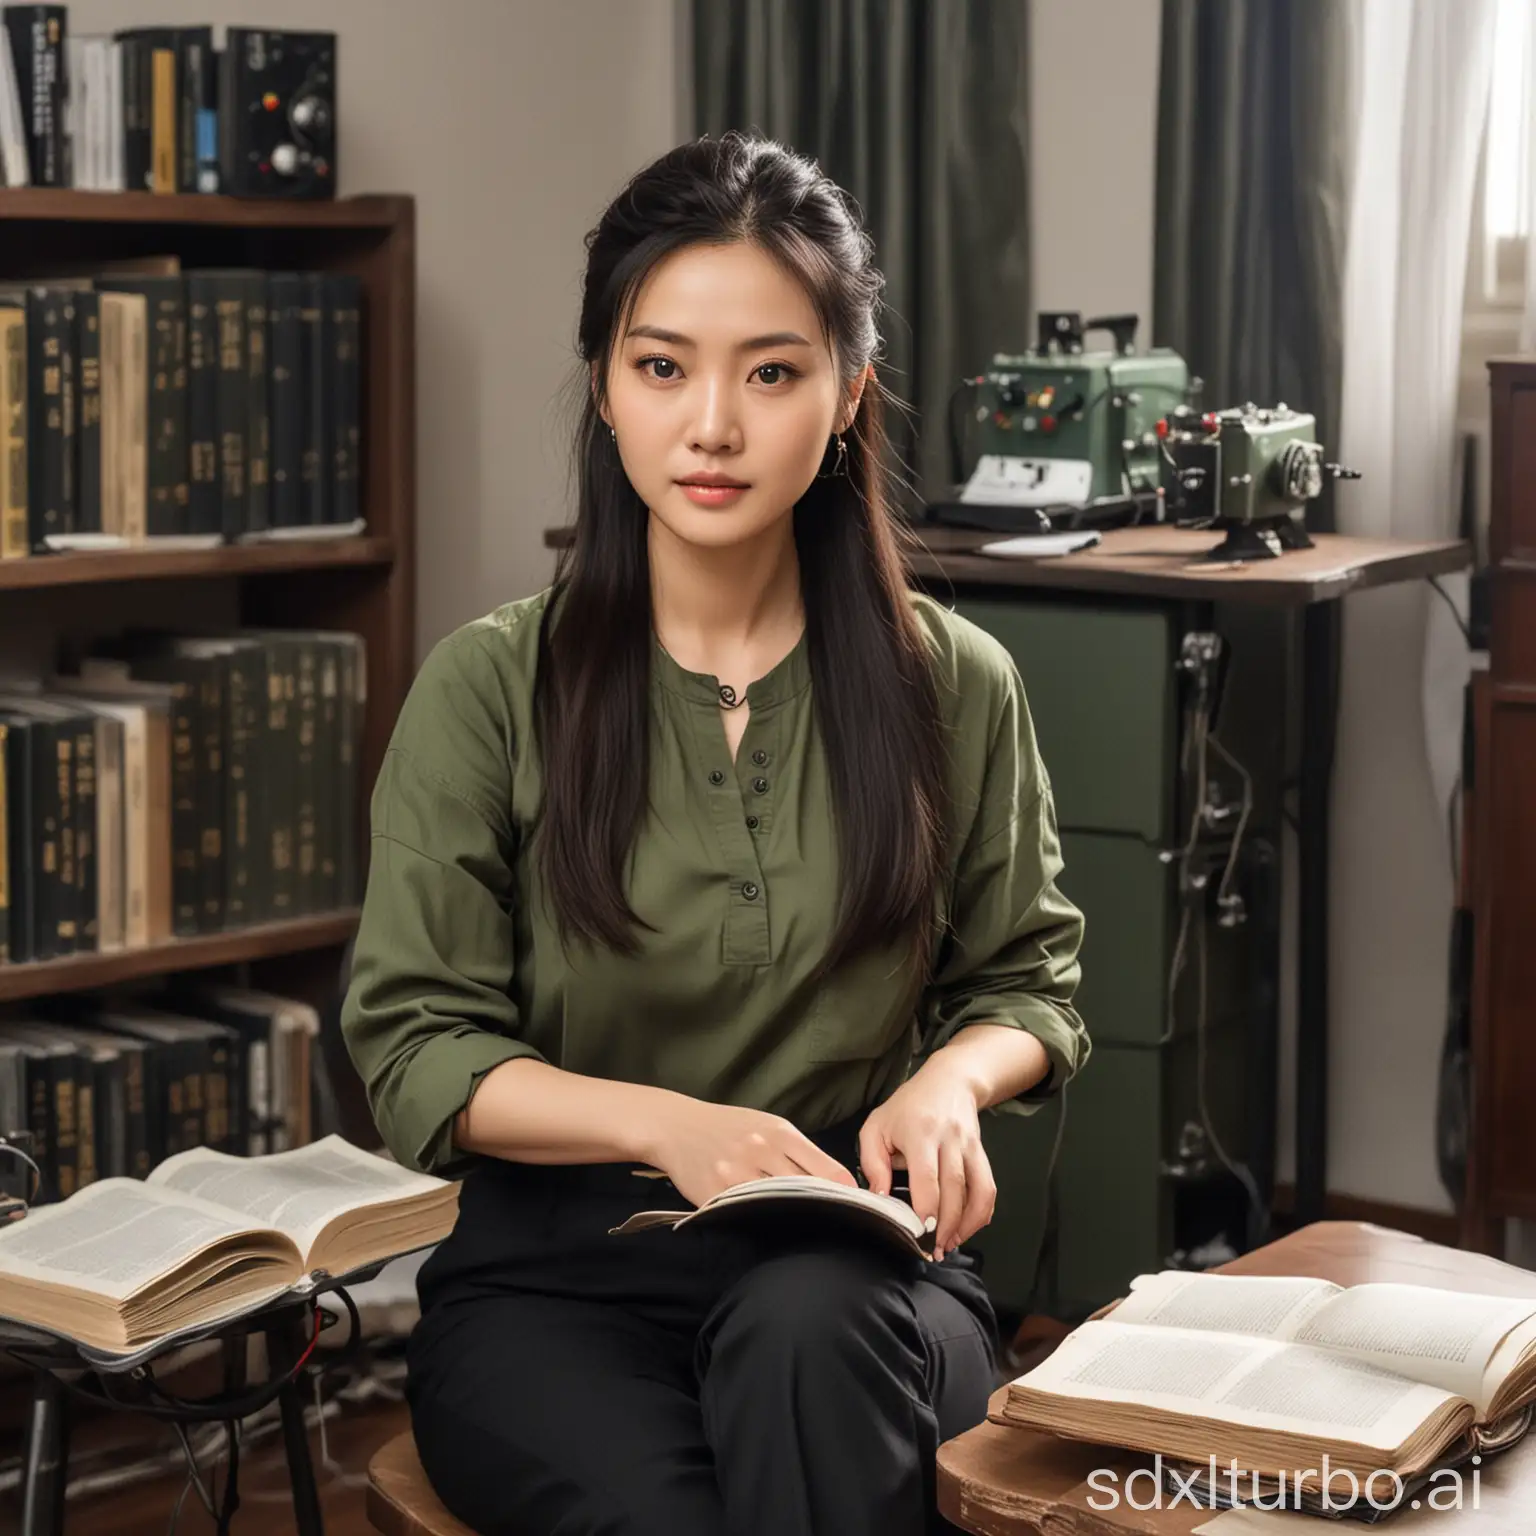 A beautiful Chinese female professor, who looks like the female celebrity Liu Tao, is wearing a plain army green top and plain black pants, with her long hair braided, sitting in a room reading a book, with a pile of electrical experimental equipment in the background.